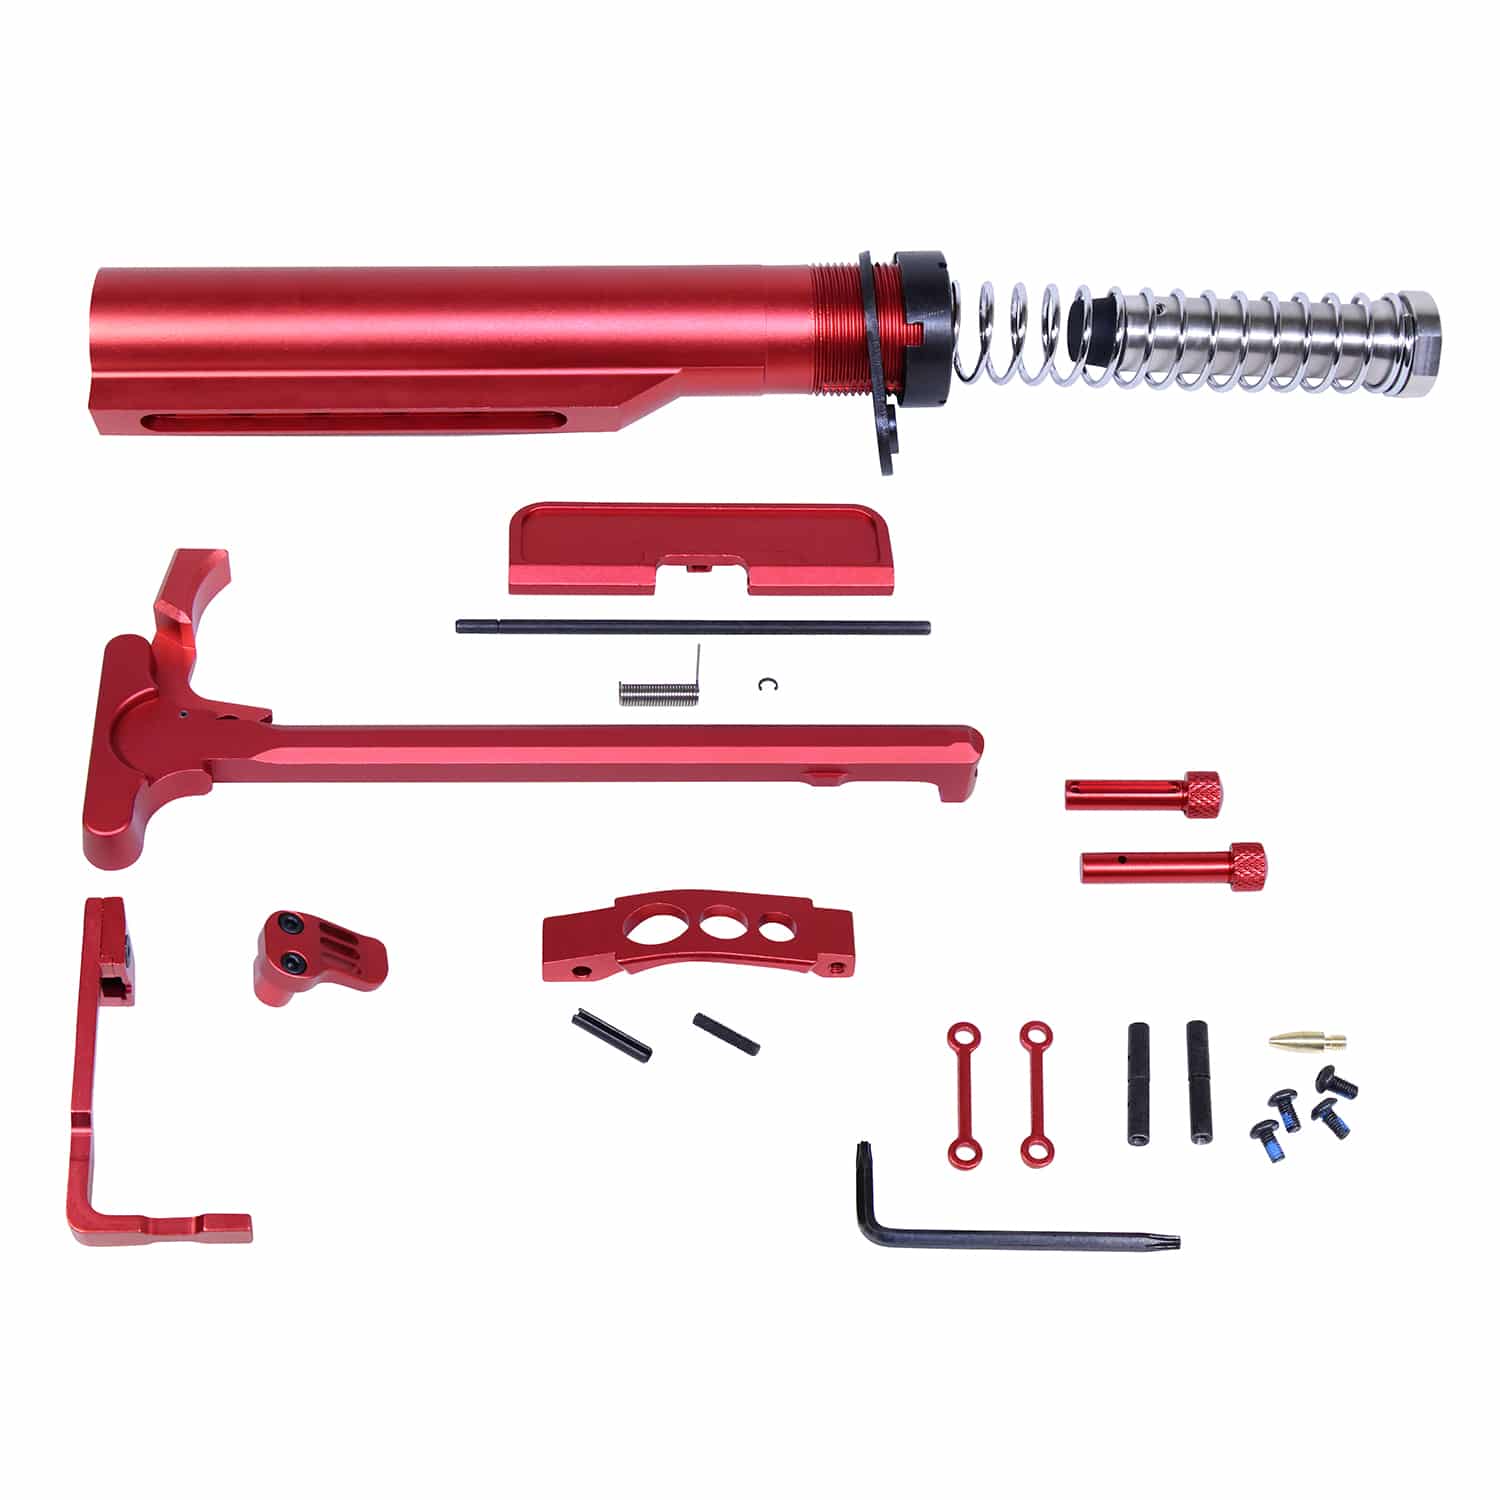 AR-15 Essentials Kit (Anodized Red)